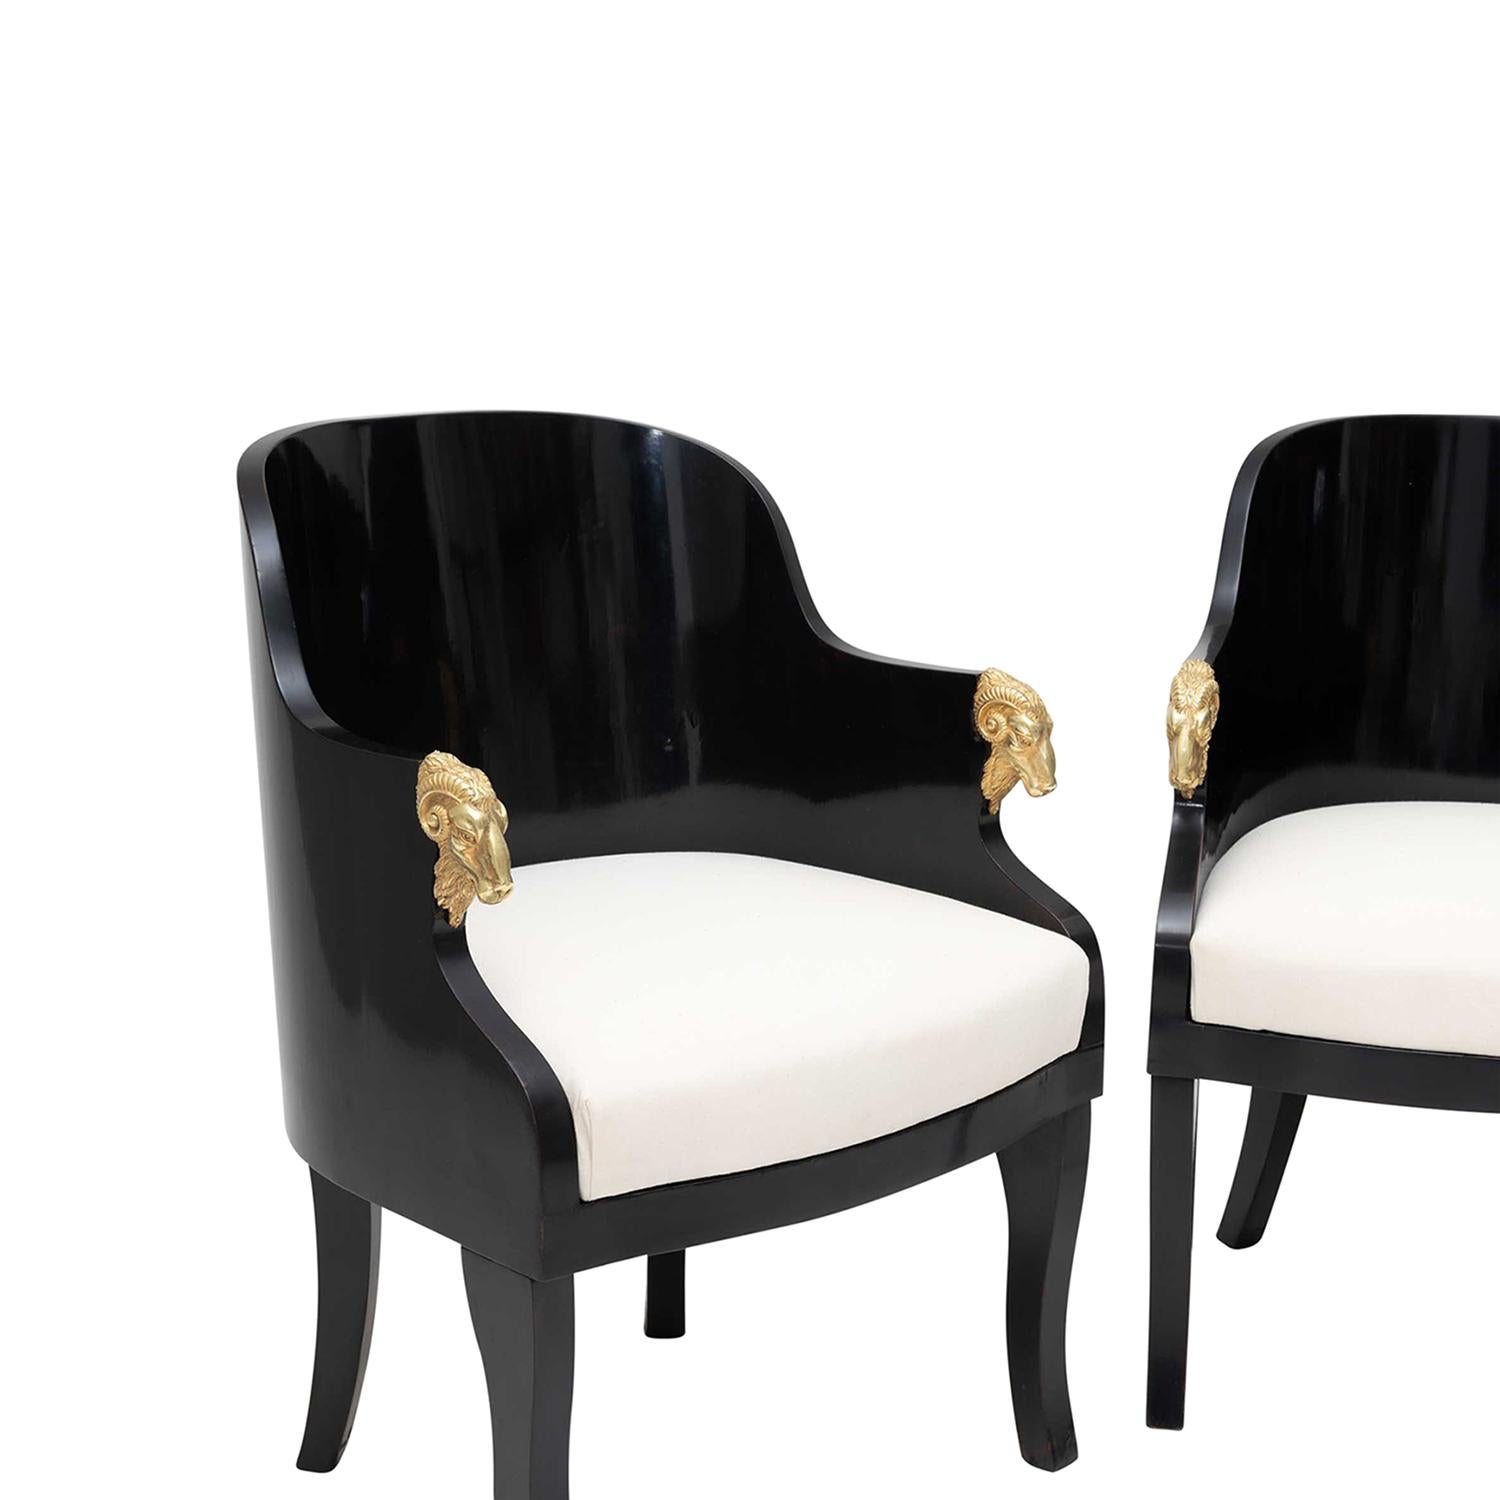 A 19th Century, antique Baltic pair of black armchairs made of hand crafted lacquered Birchwood, in good condition. The small detailed side, club chairs have a rounded back with slim armrests, particularized by gilded goat heads, standing on four